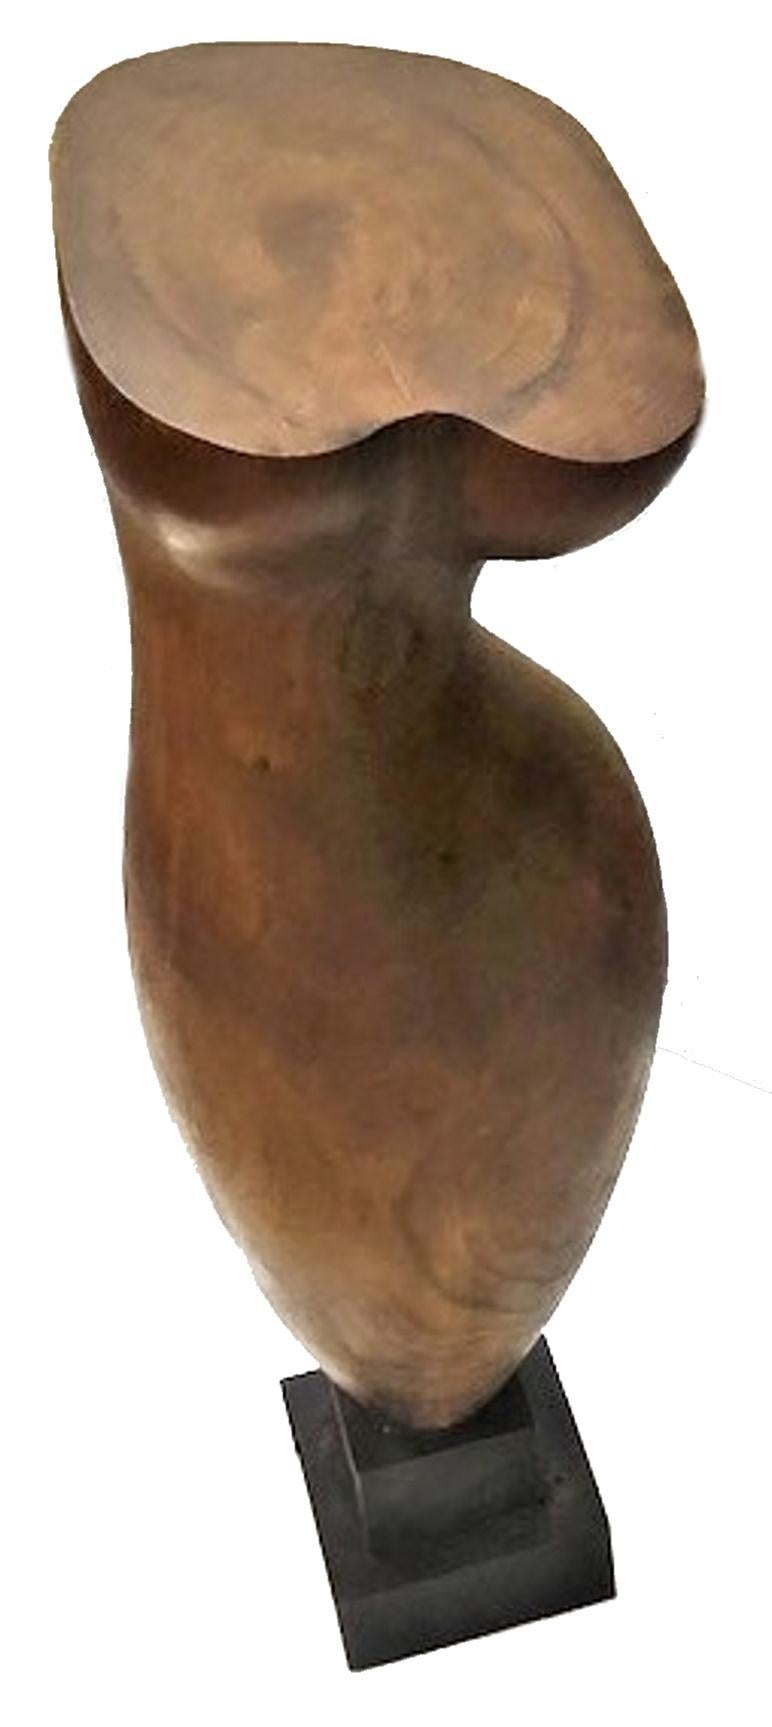 Nude Female Torso, American Mid-Century Modern Wooden Sculpture, ca. 1950s In Good Condition For Sale In New York, NY